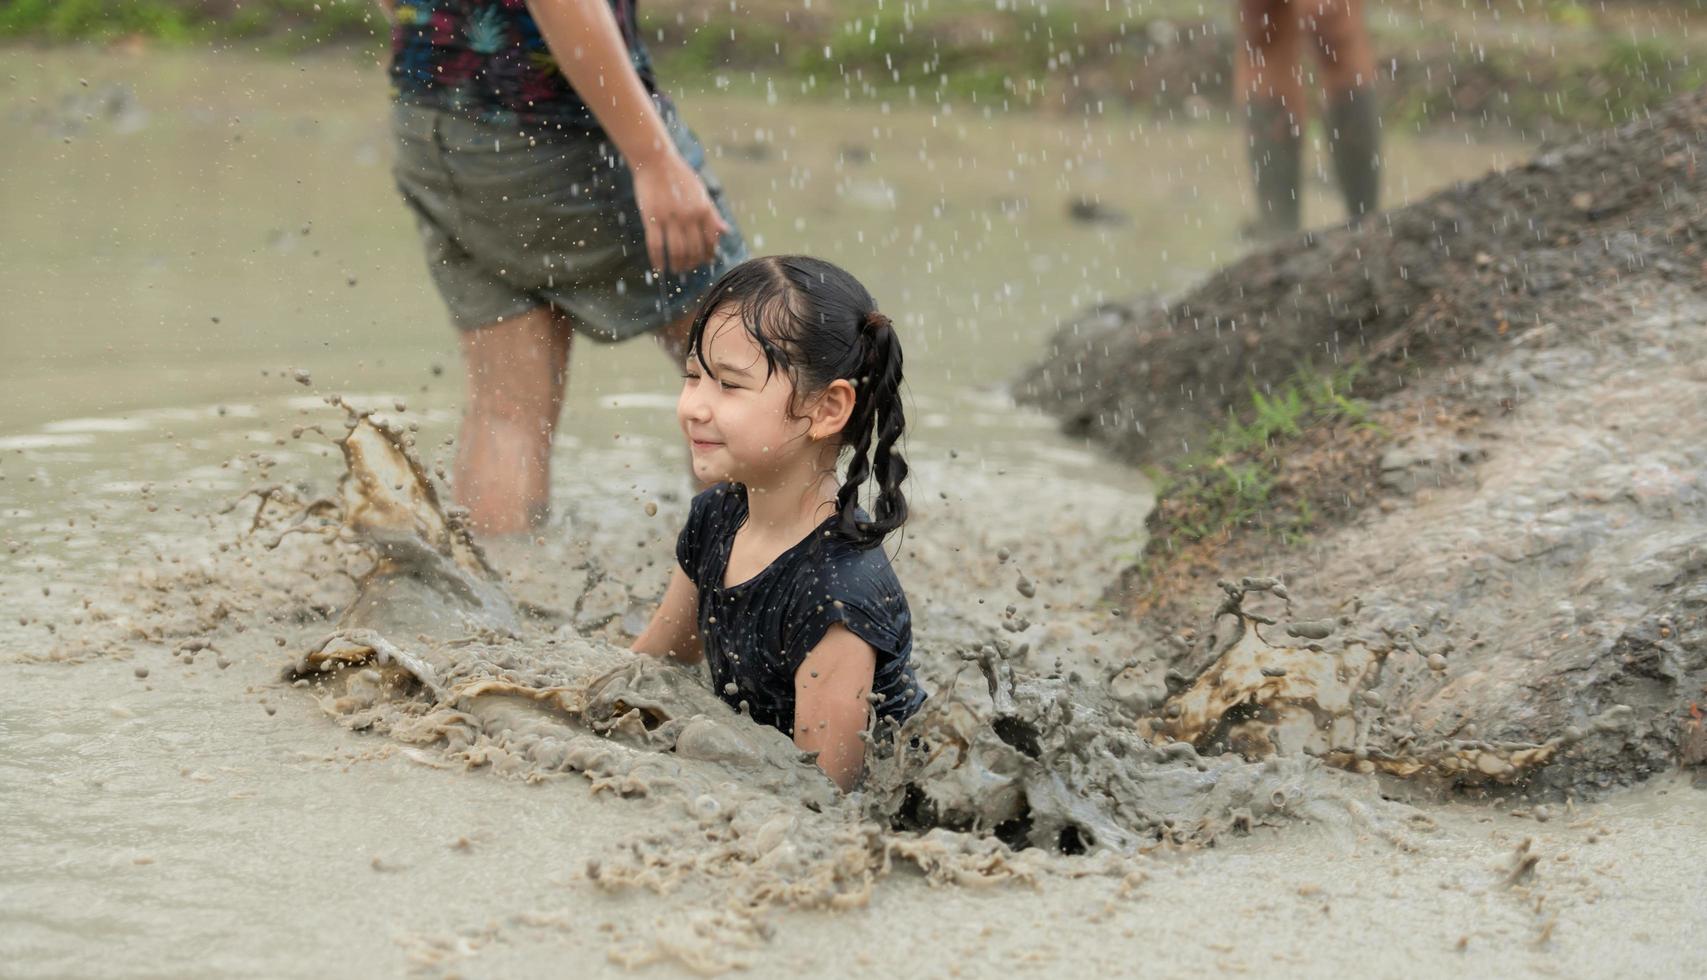 Little girls have fun playing in the mud in the community fields photo